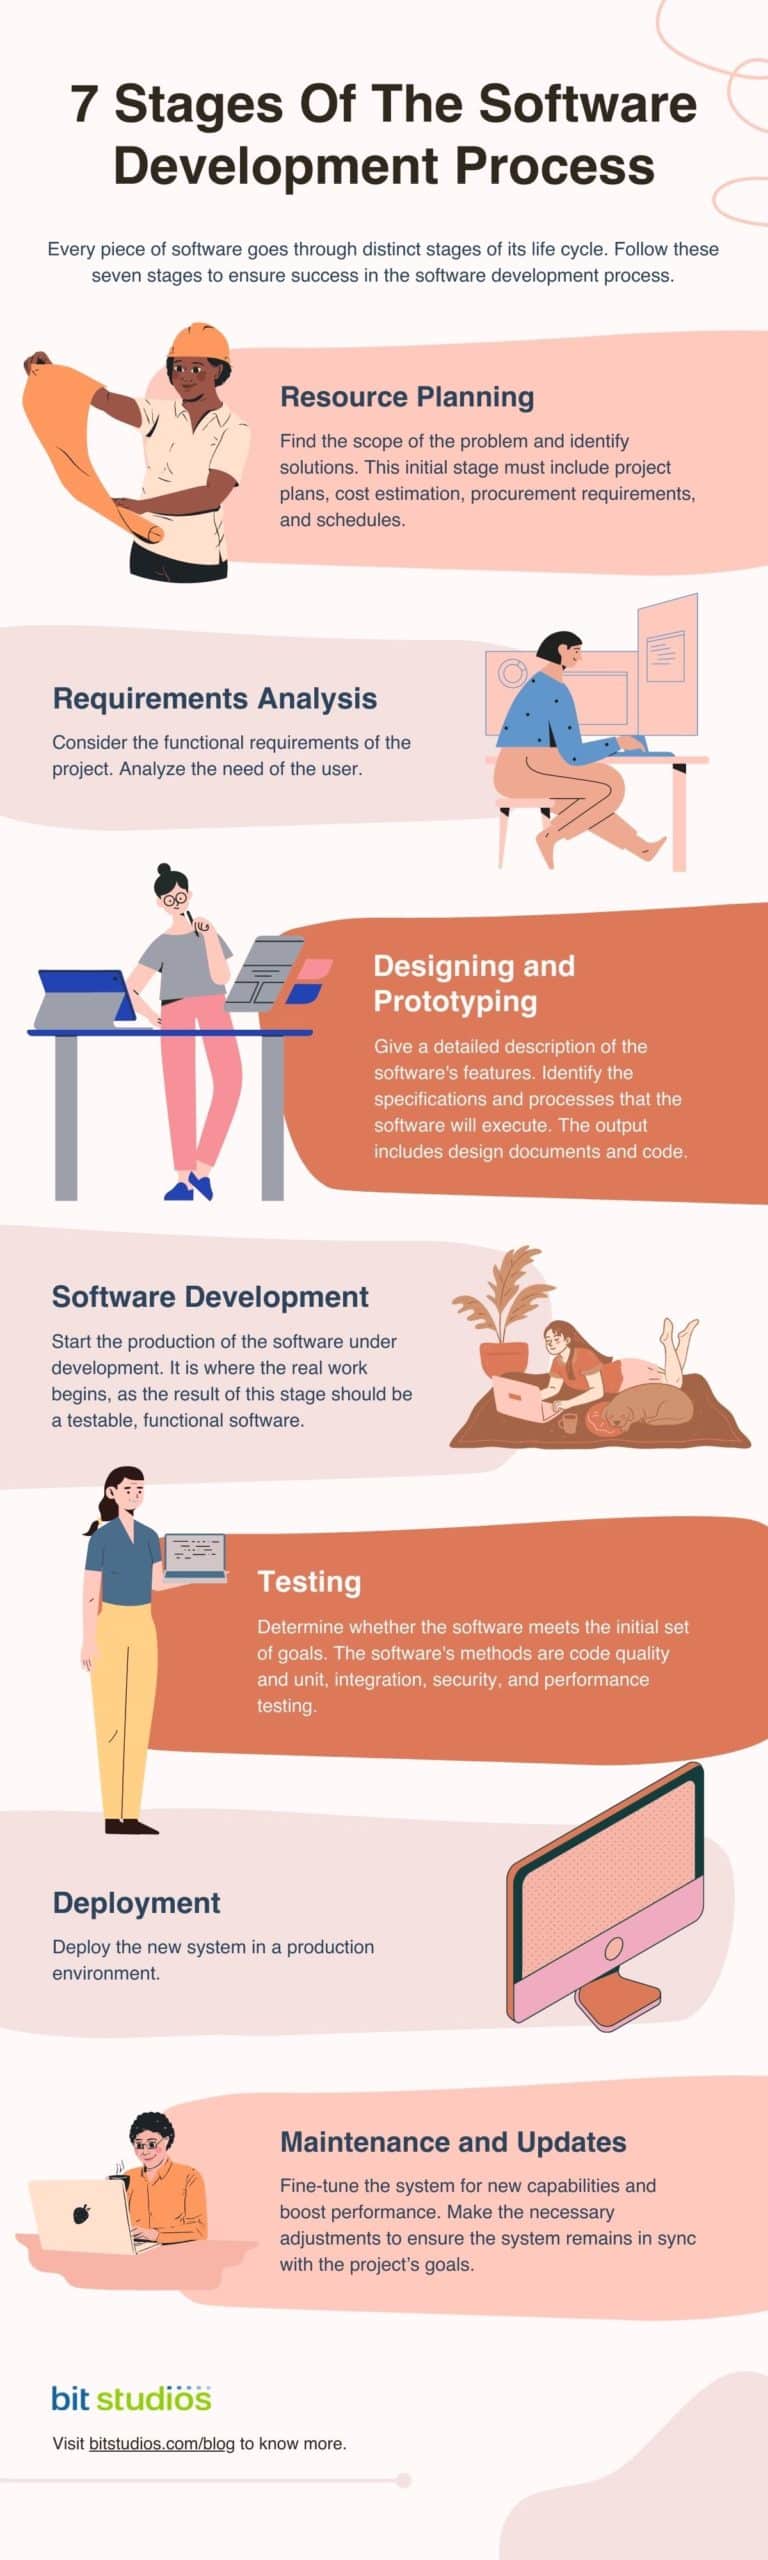 Stages of Software Development Process